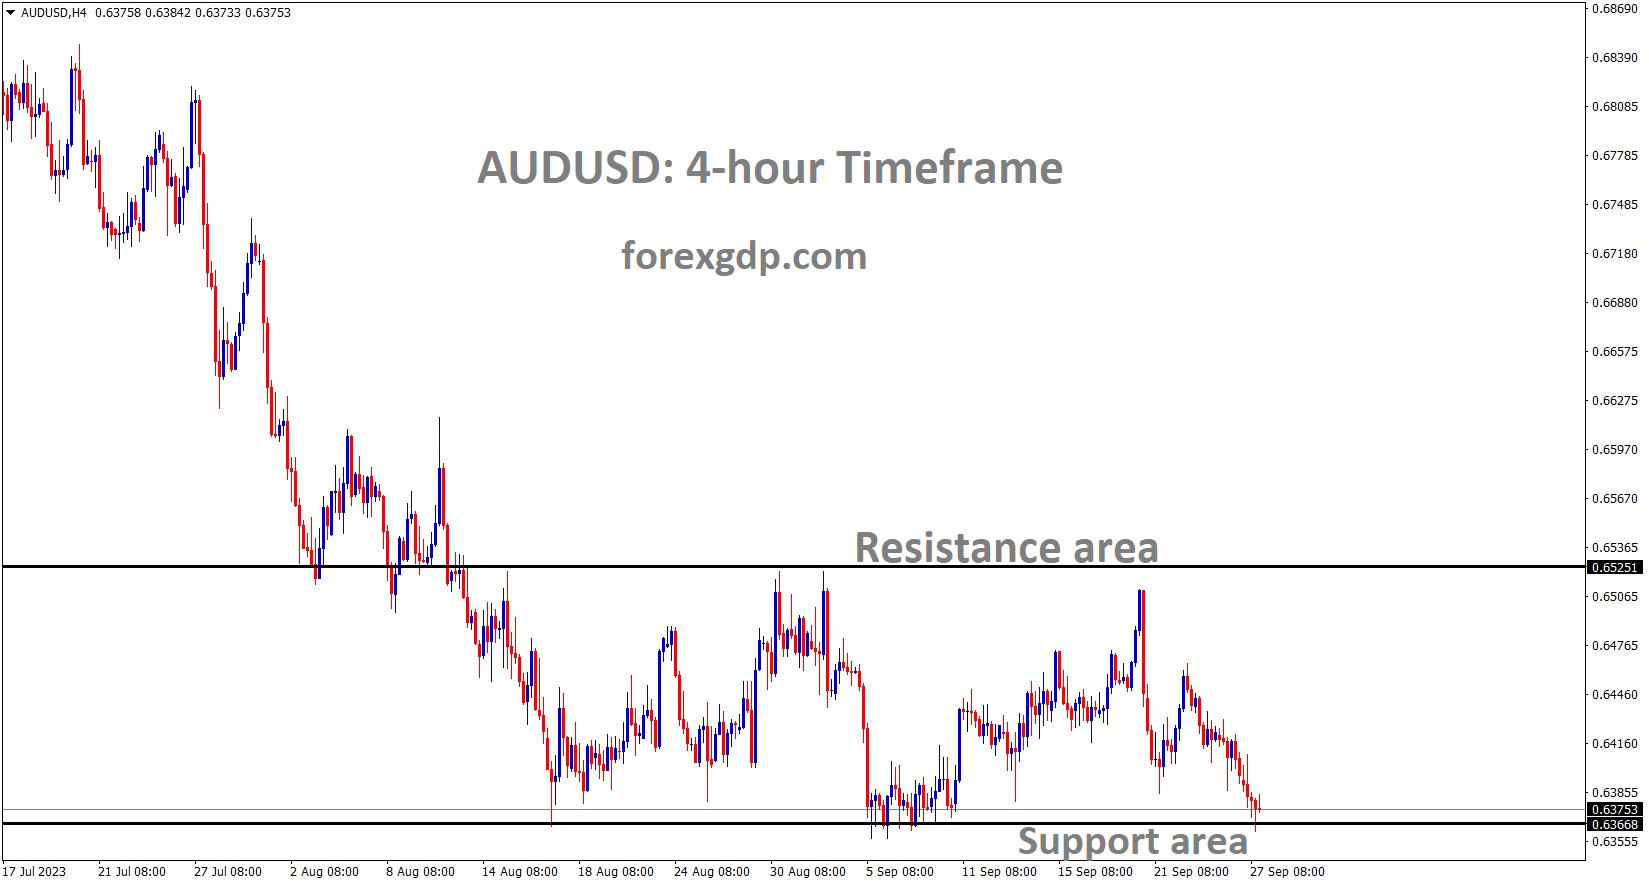 AUDUSD is moving in the Box pattern and the market has reached the support area of the pattern